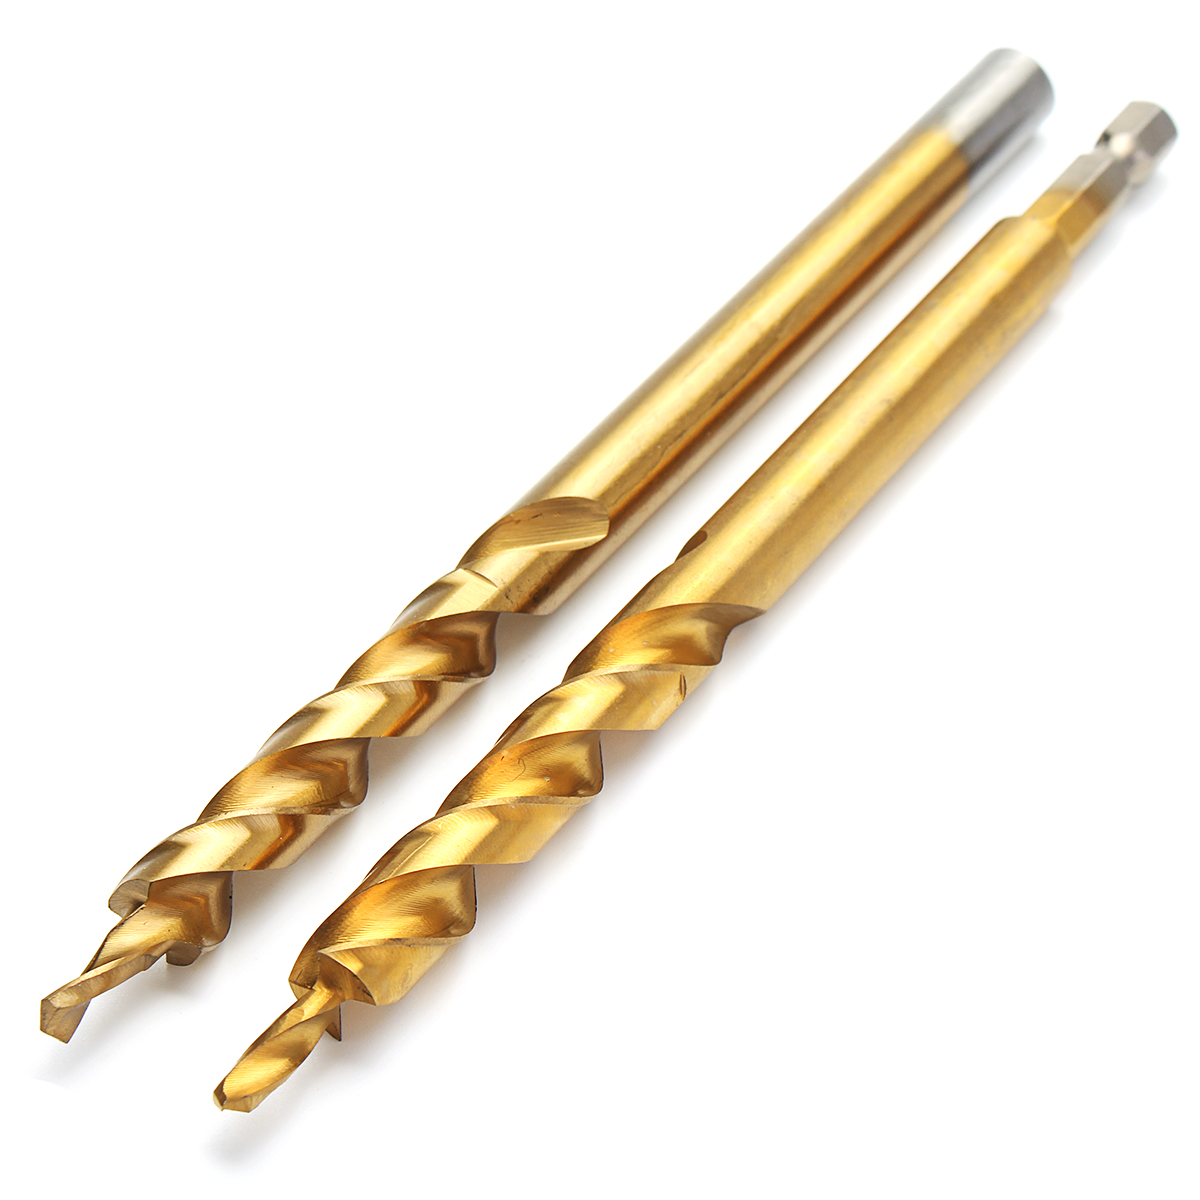 

3/8 Inch 9.5mm Twist Step Drill Bit With Titanium Coated for Pocket Hole Jig Woodworking